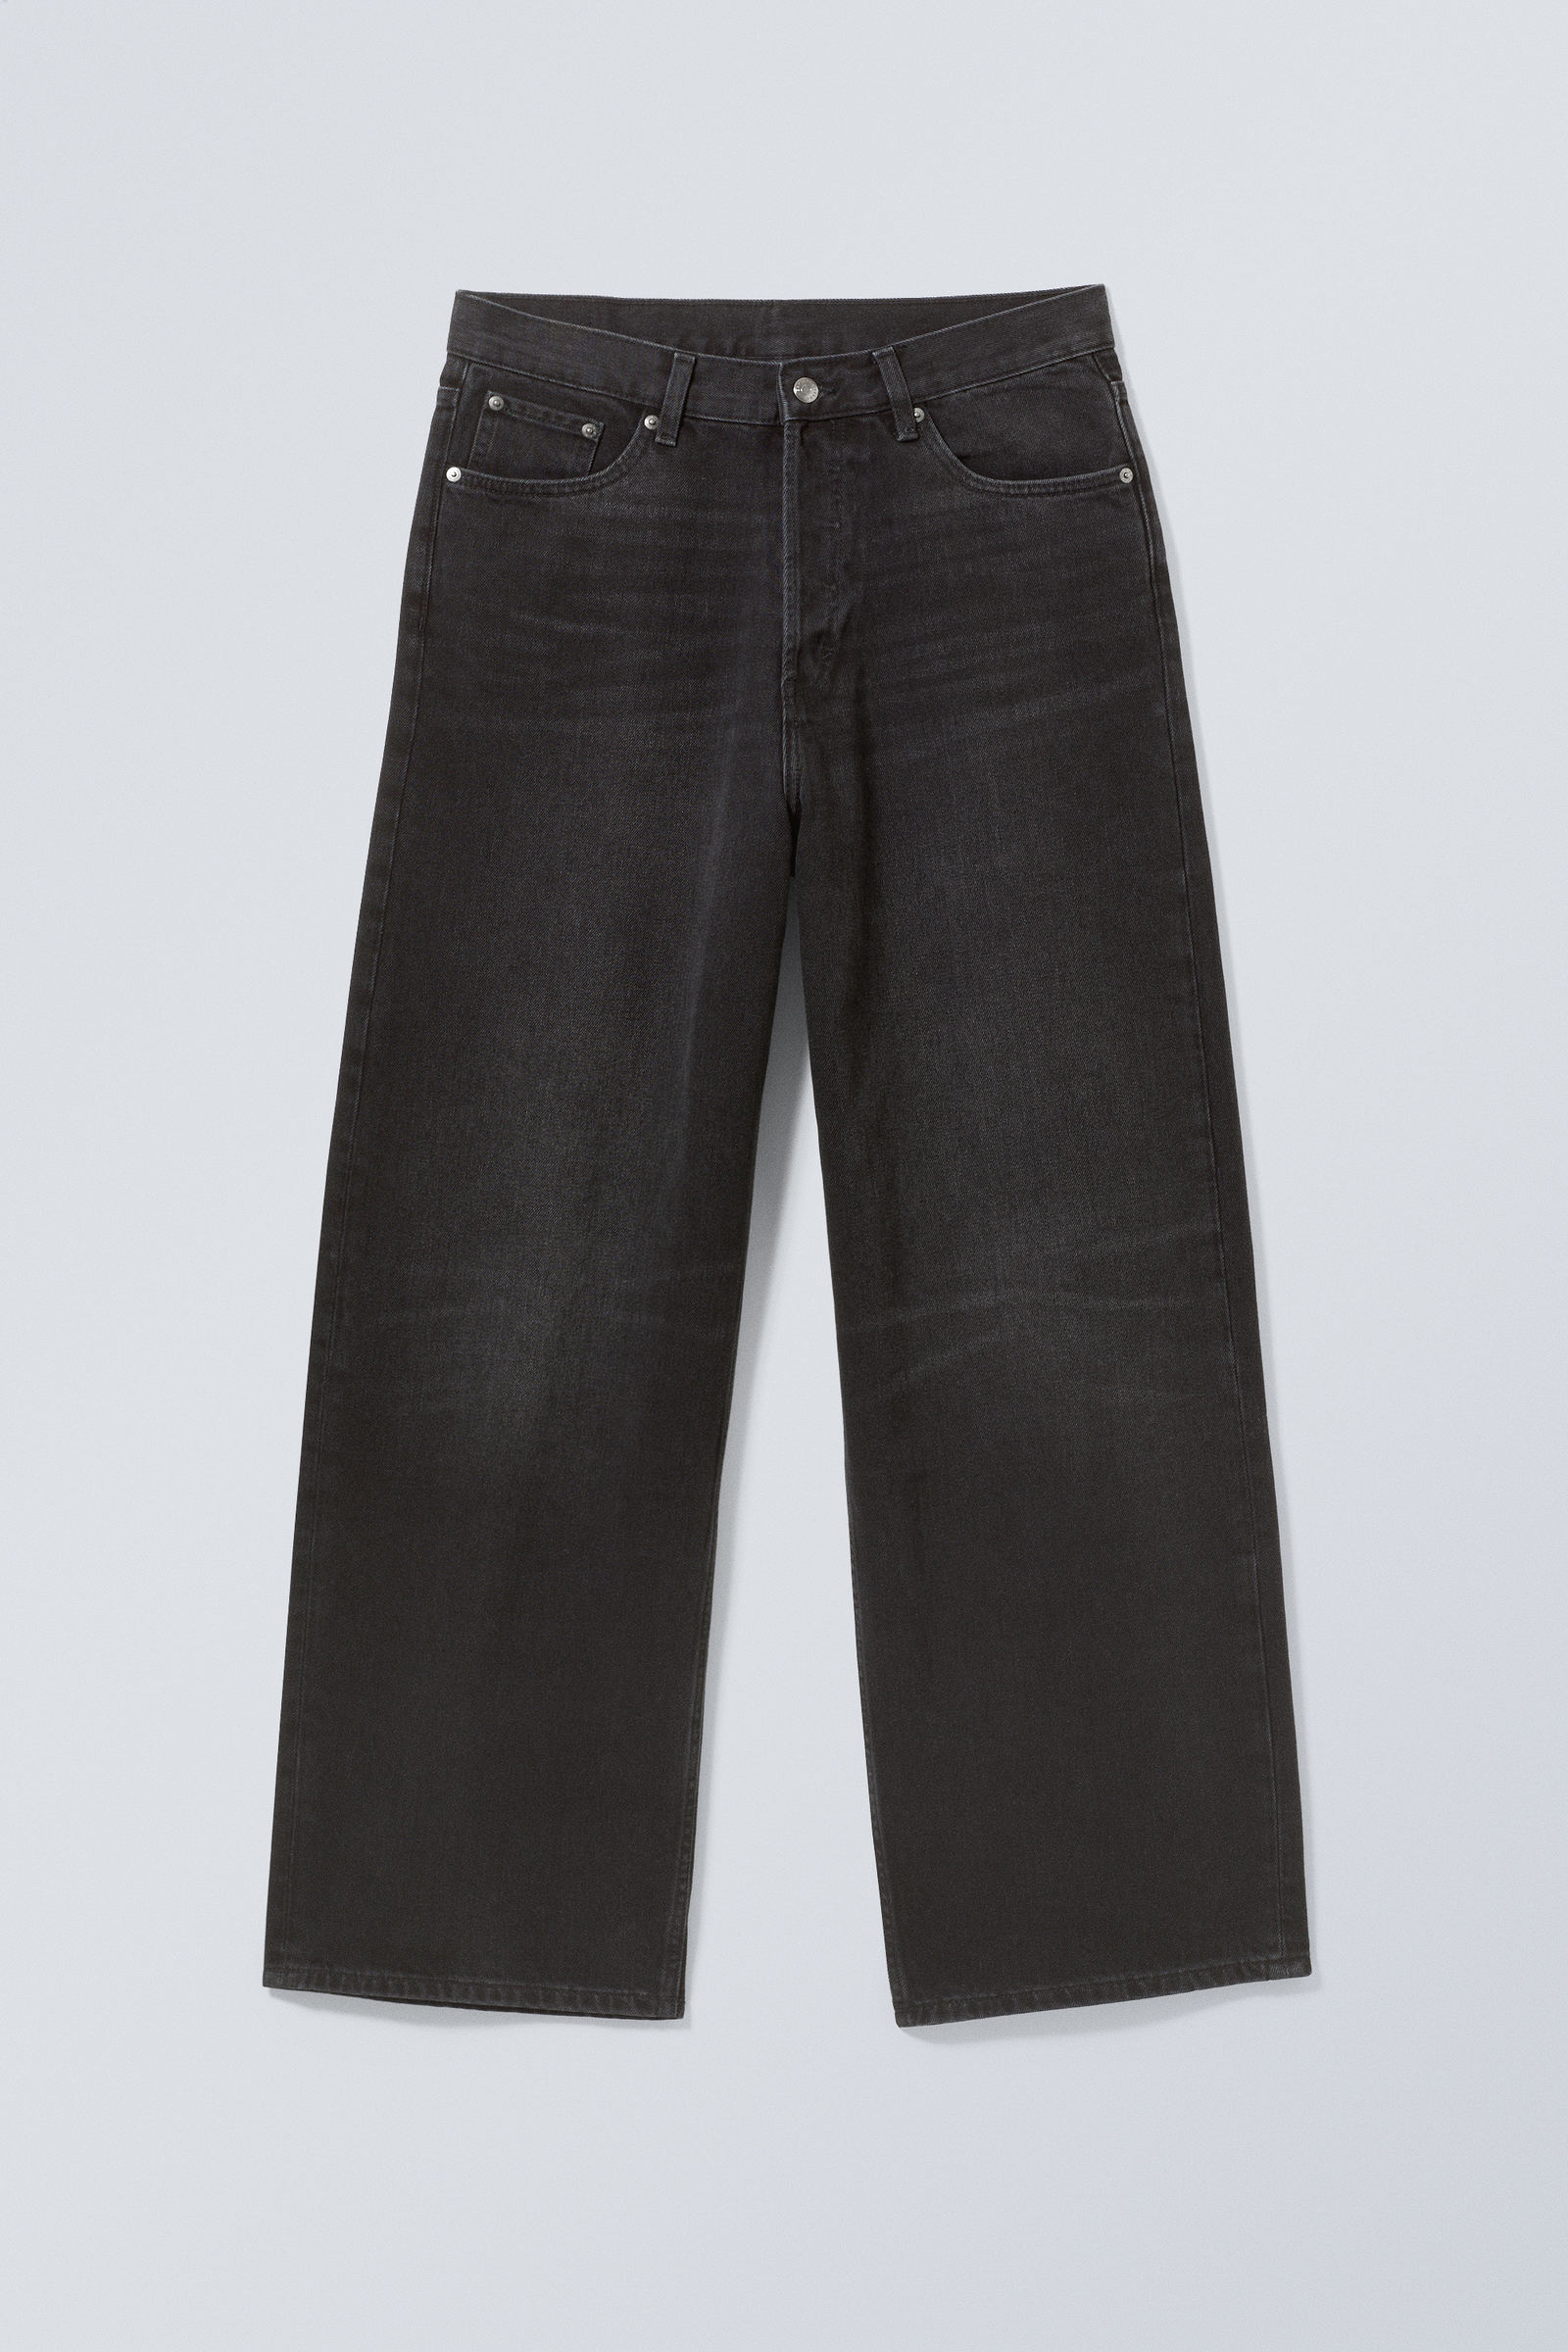 #000000 - Astro Loose Baggy Jeans - 2